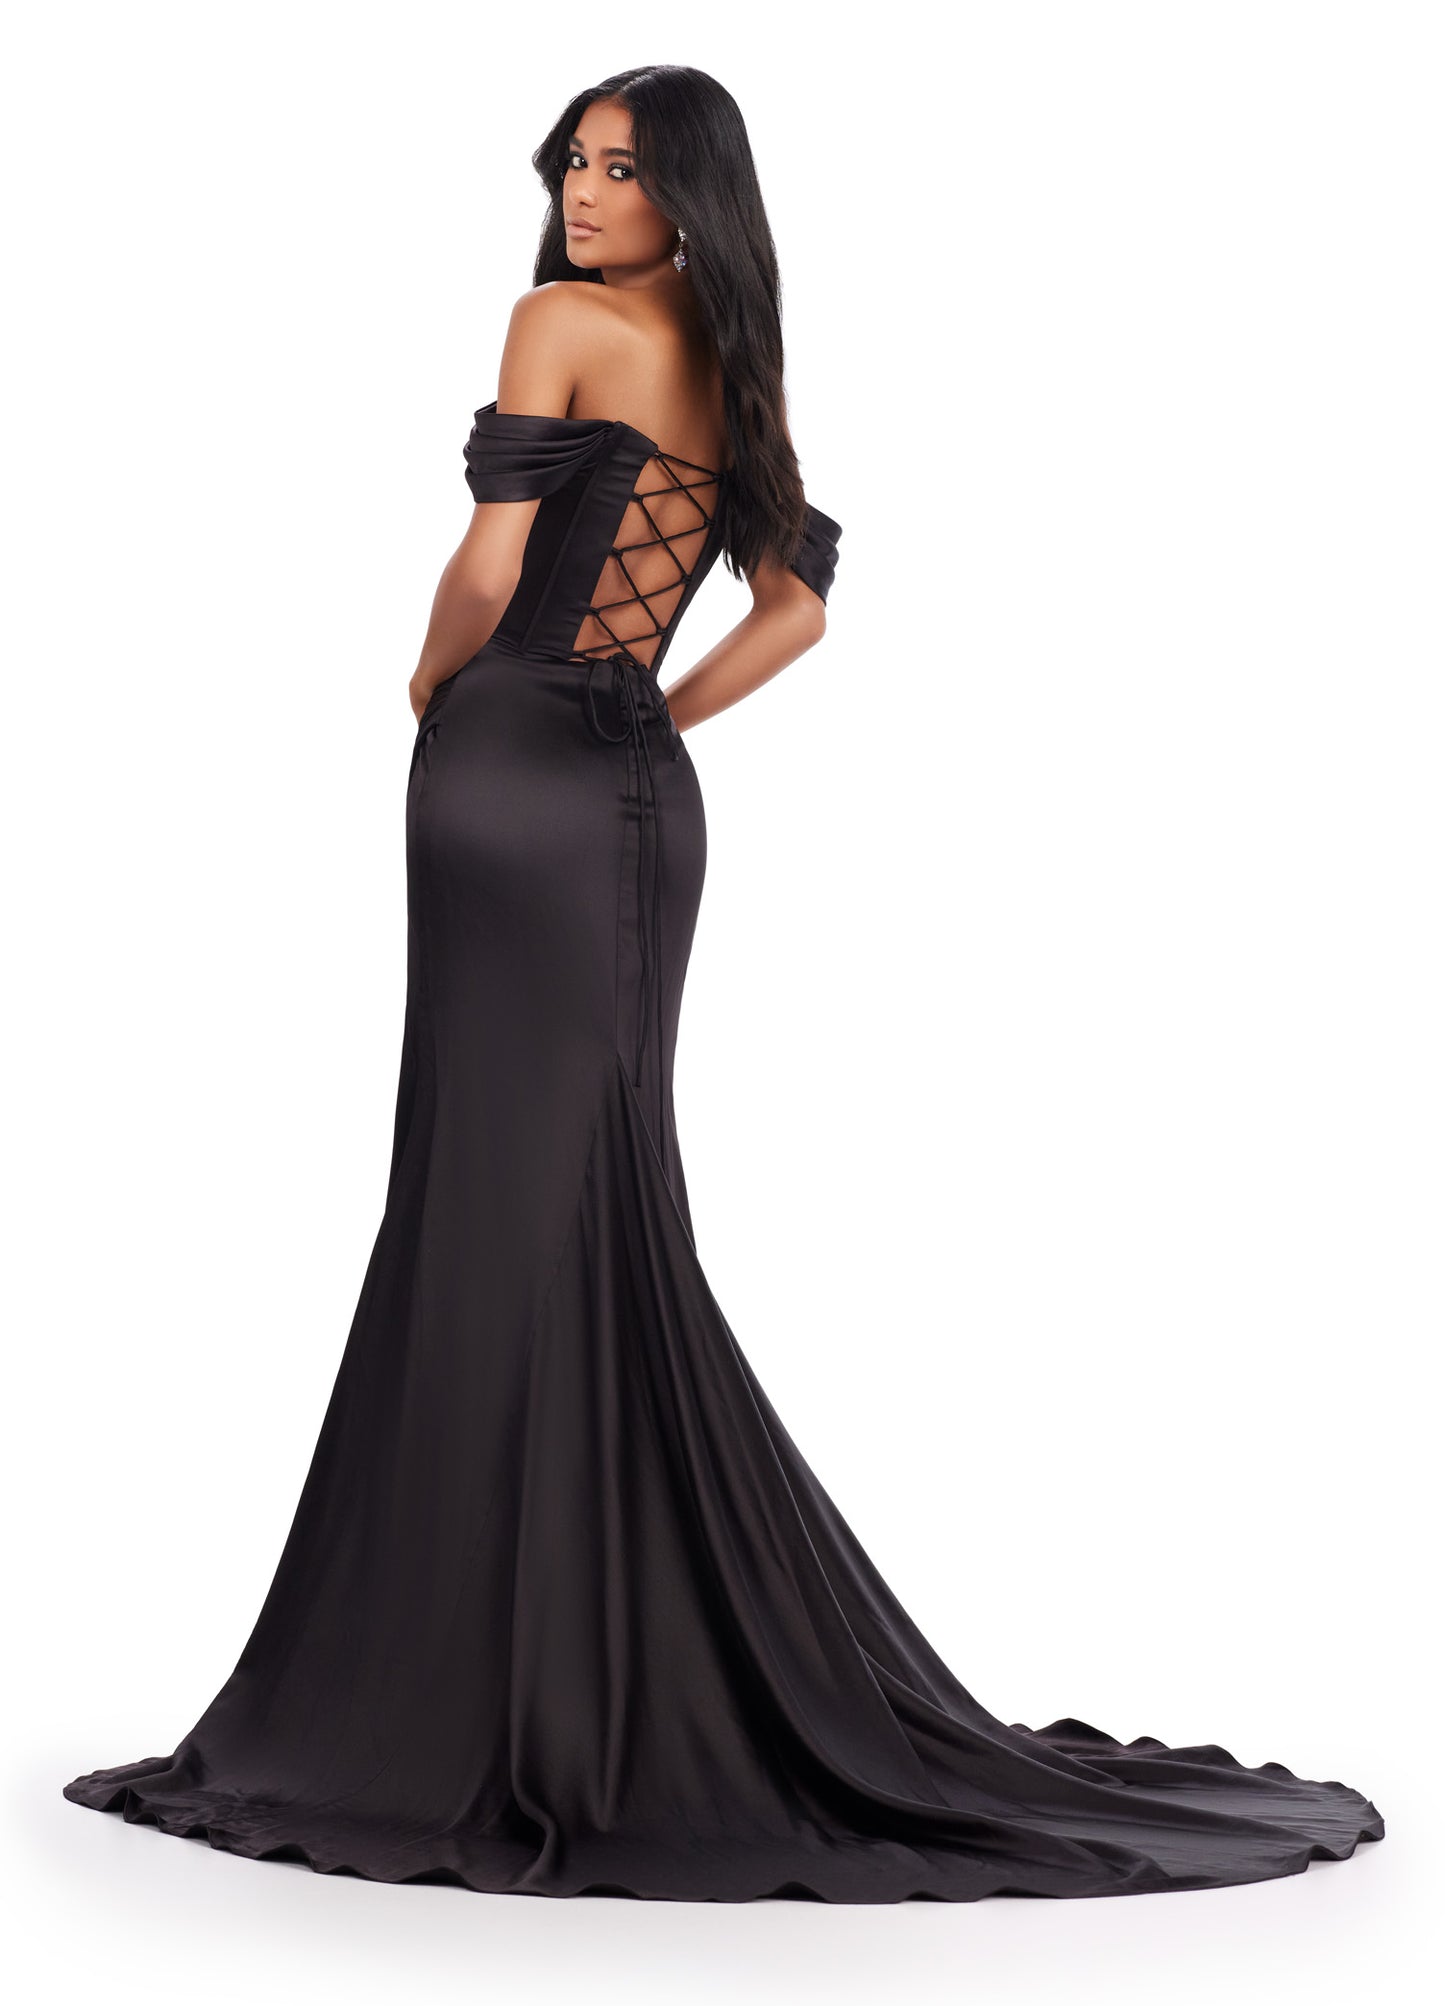 Expertly crafted by Ashley Lauren, this long prom dress features a stunning corset, elegant off shoulder design, and luxurious satin fabric. The daring high slit and flattering ruched hip accentuate your figure, making it perfect for formal events and pageants. Elevate your style with this exquisite gown. This strapless satin gown with corset bustier is accented by an elegantly draped skirt with slit. The look is complete with a sweep train and lace up back.